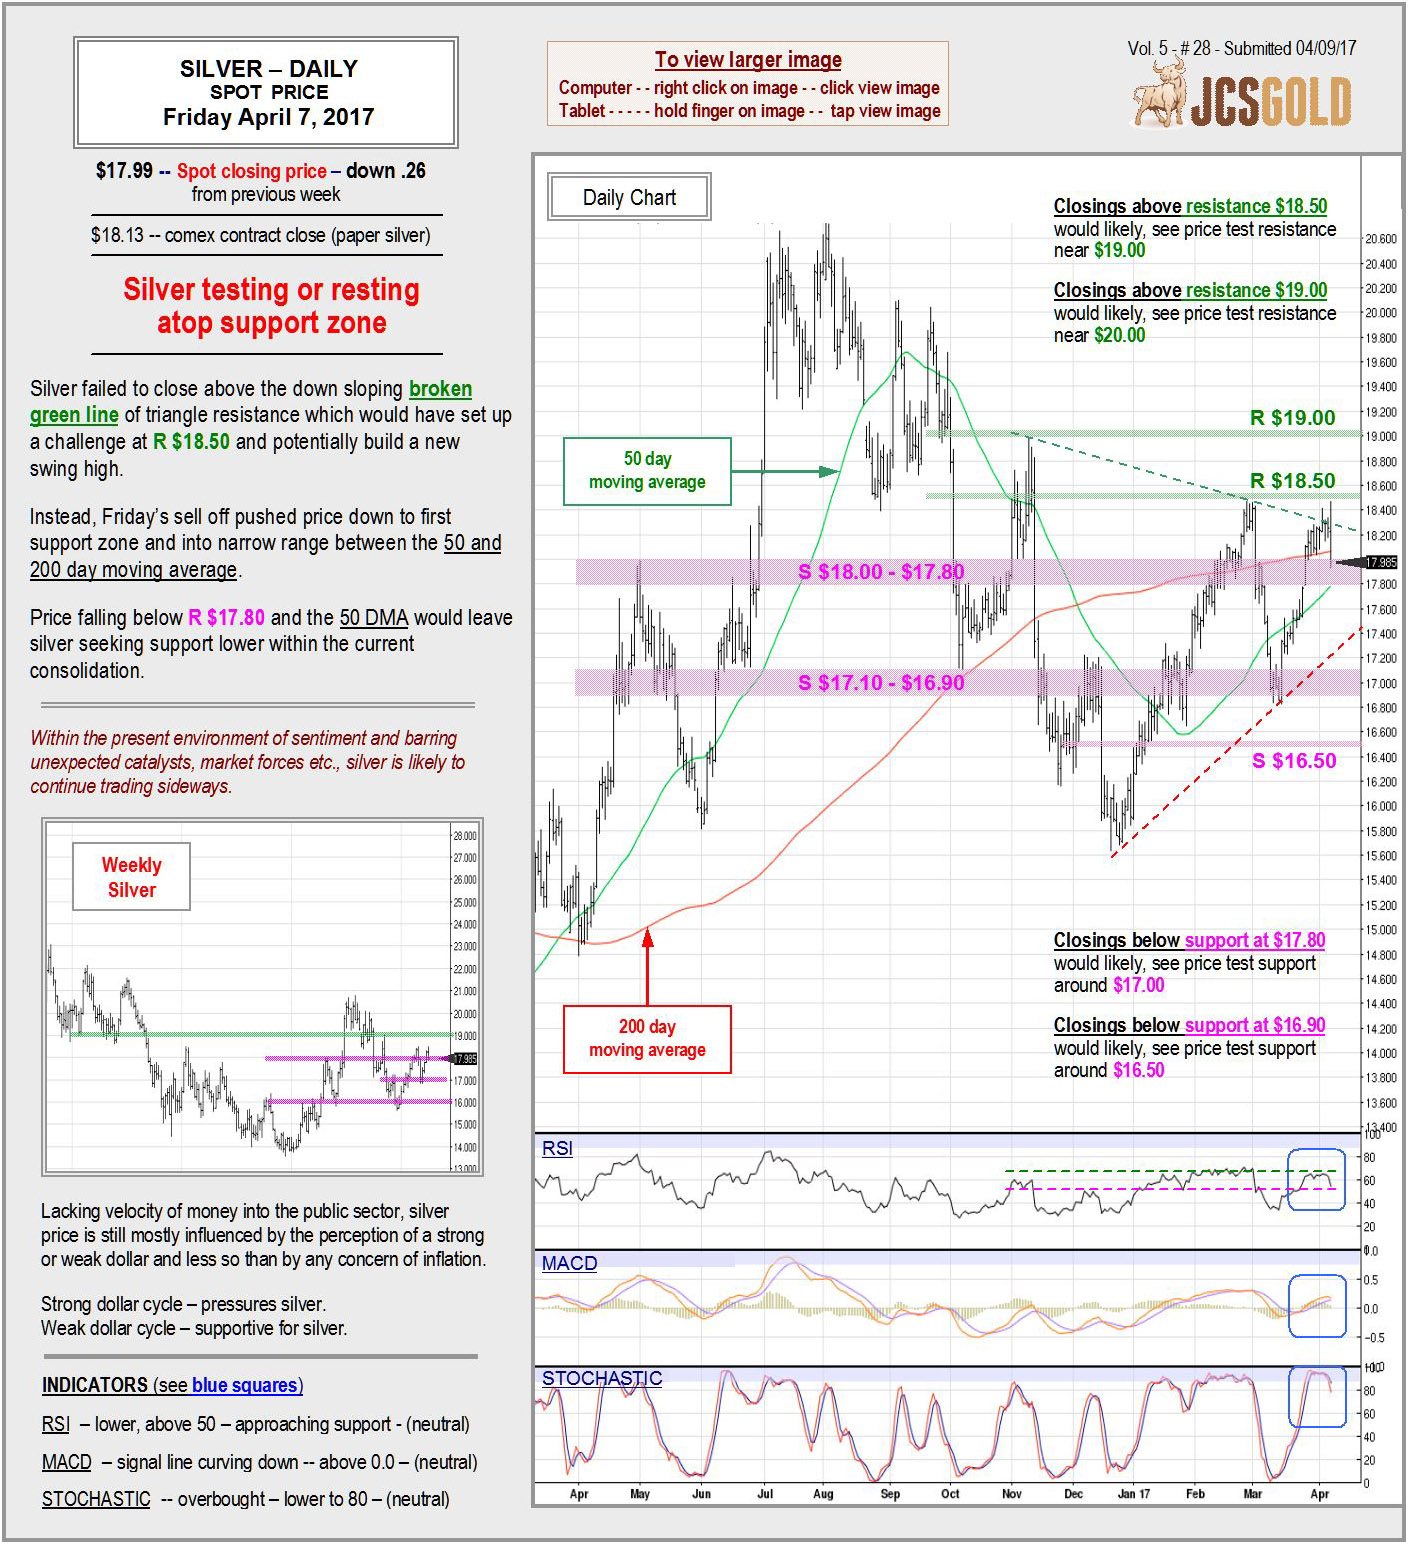 April 7, 2017 chart & commentary